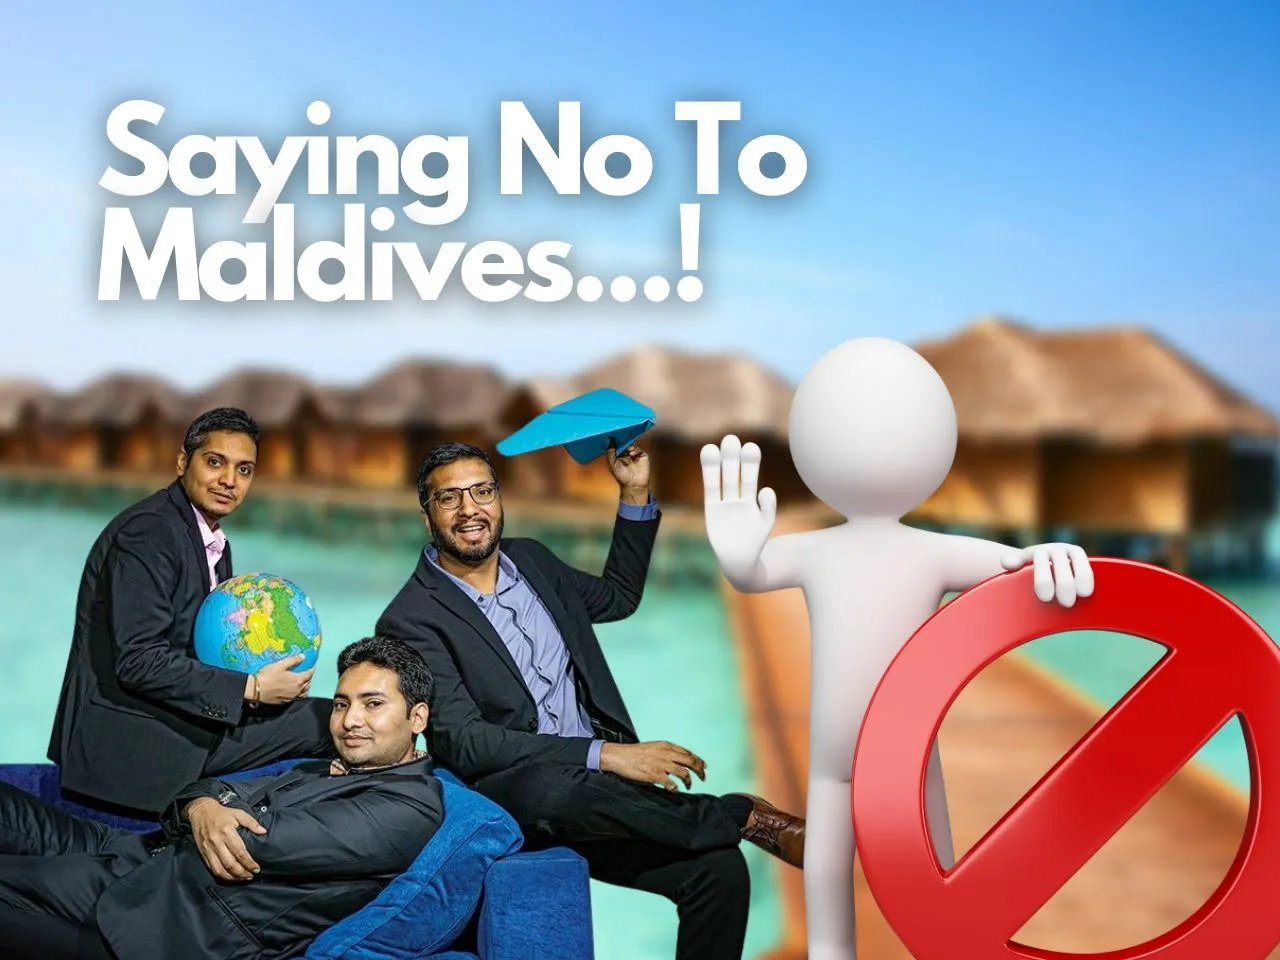 EasMyTrip Homegrow Startup Making Bold Move Over Maldives Issue